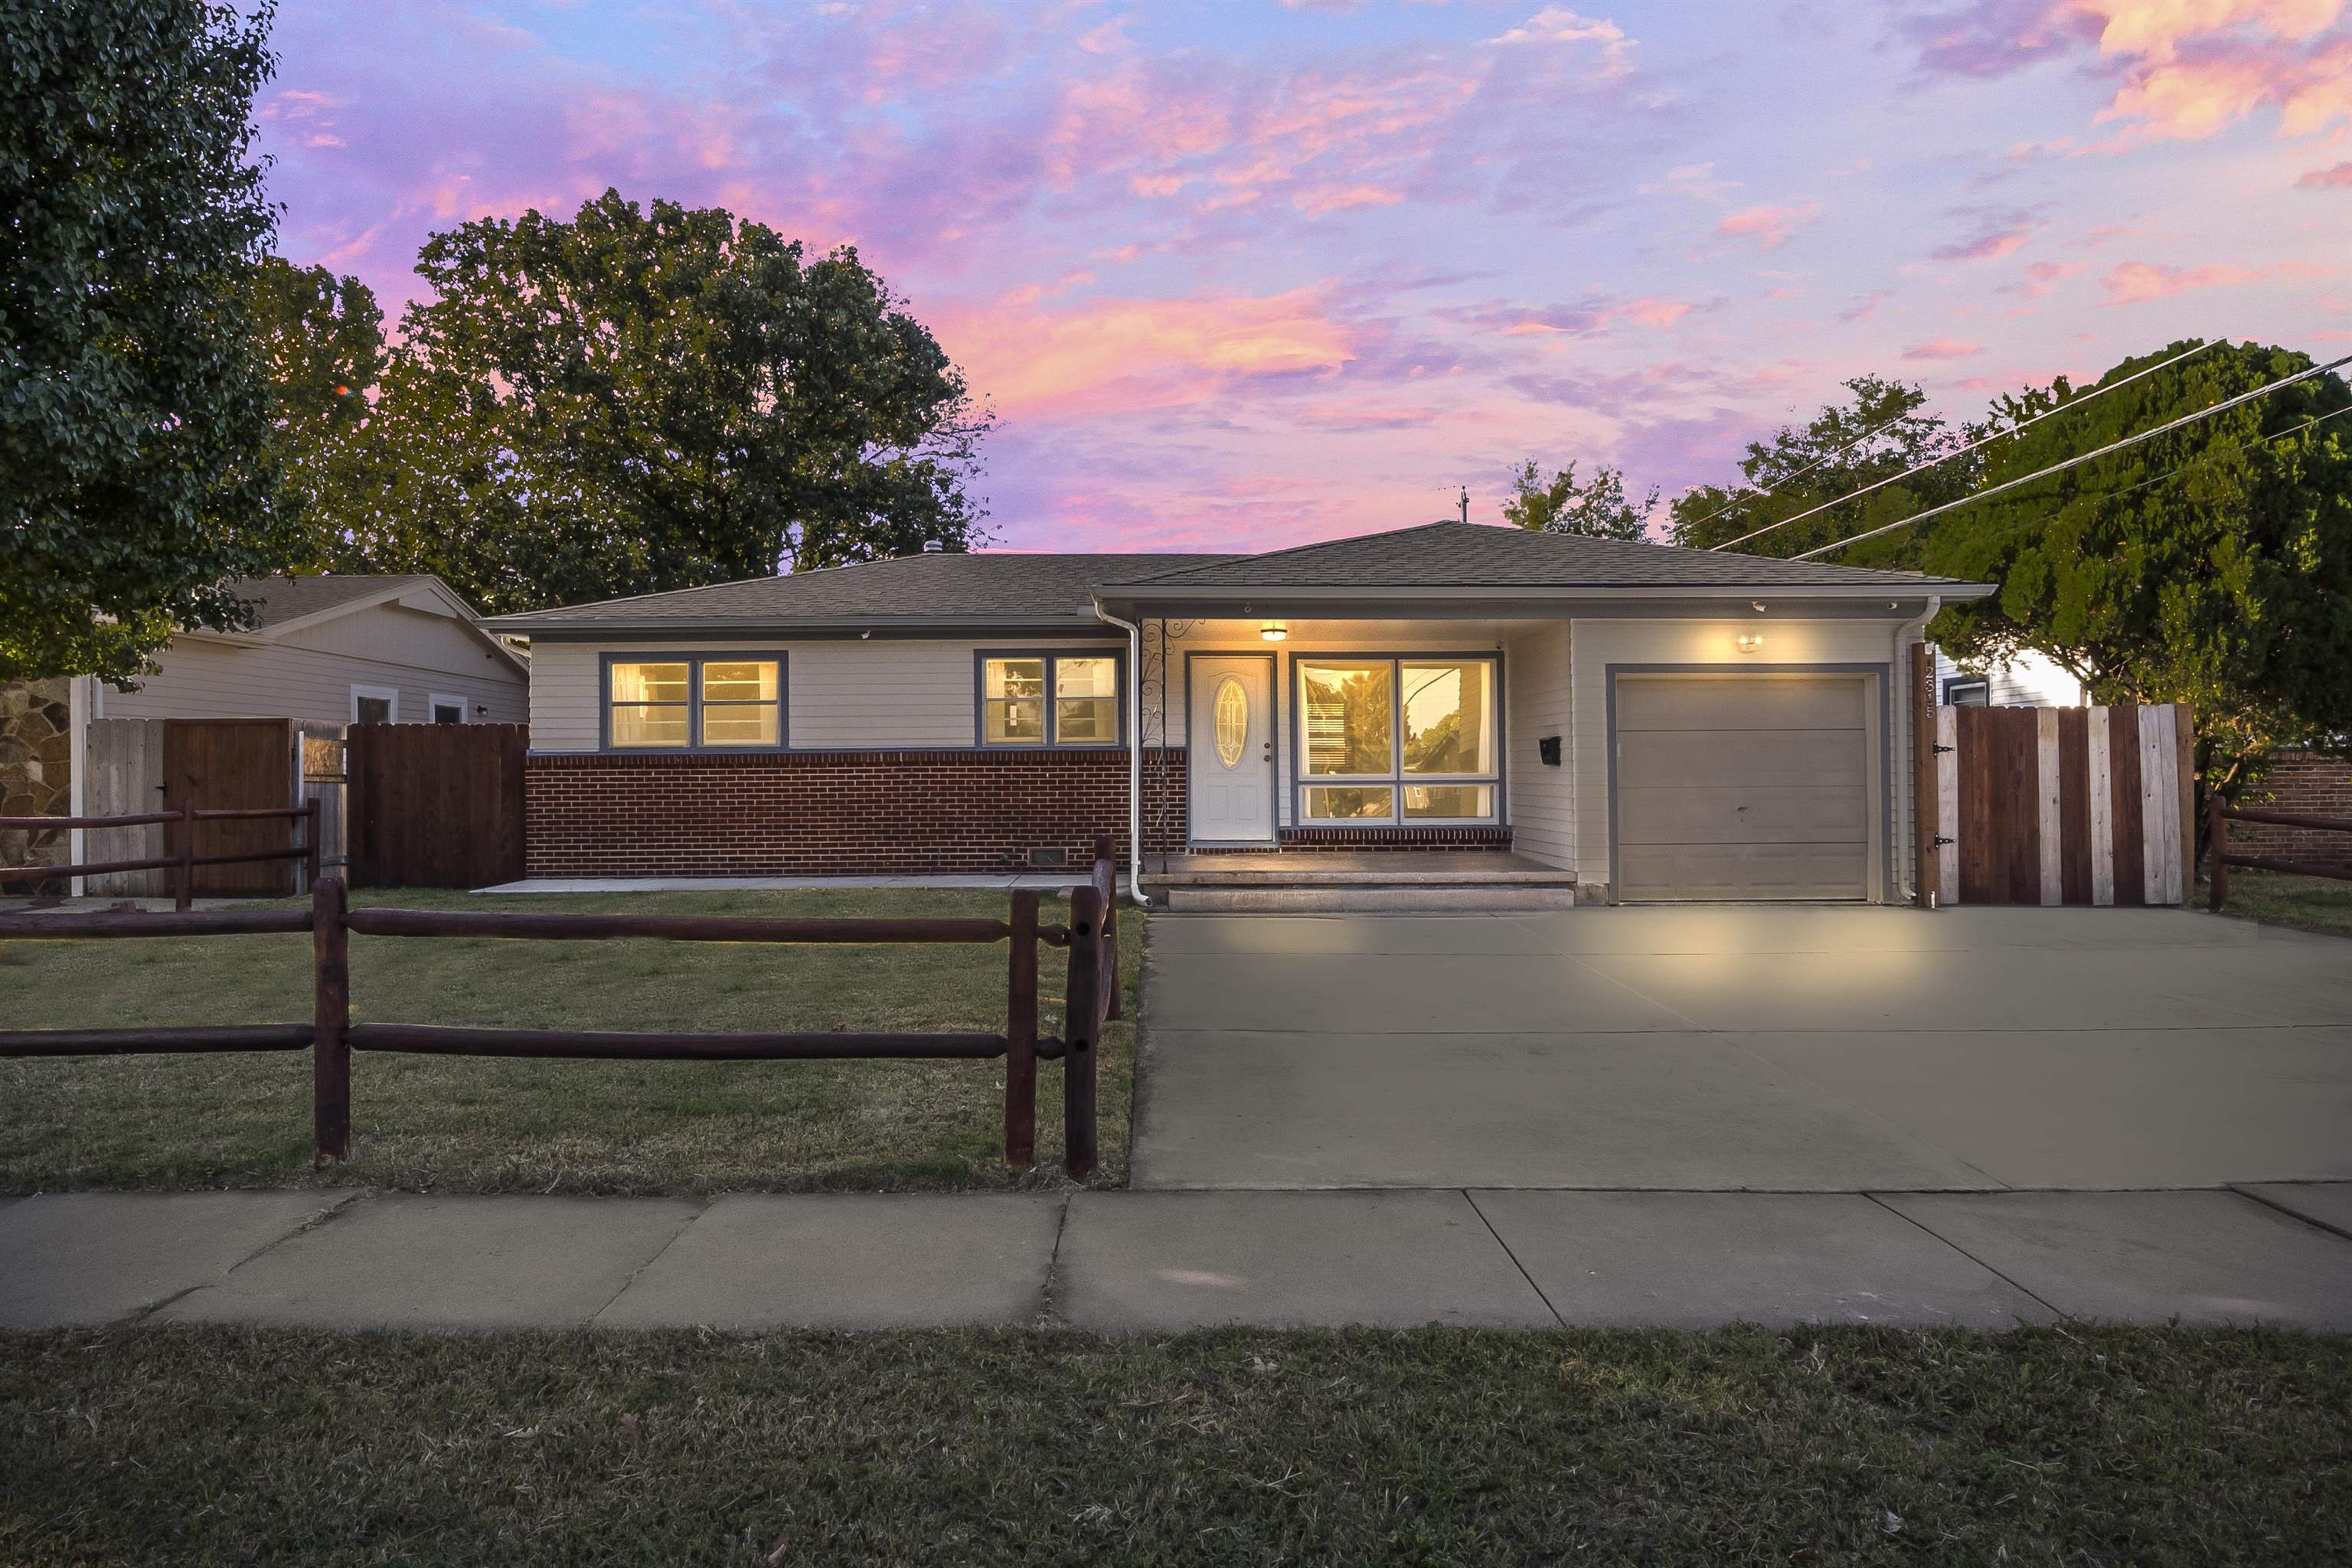 Charming 3 bedroom, 1 bath home located at 2315 W. Lydia.  This well maintained home boasts original